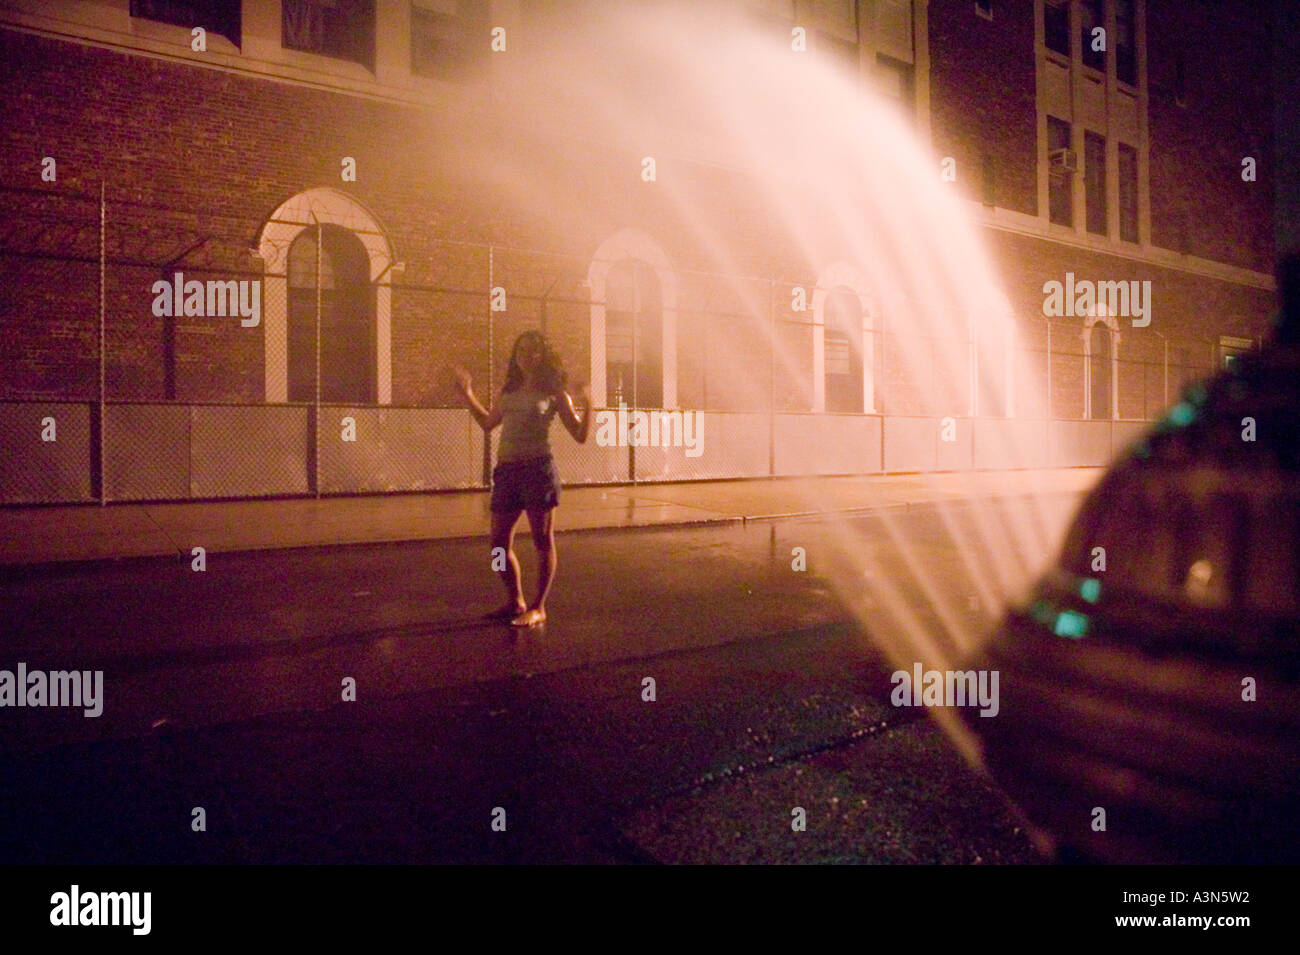 A Young Woman Enjoys The Spray Of An Open Fire Hydrant In A Street Of Stock Photo Alamy